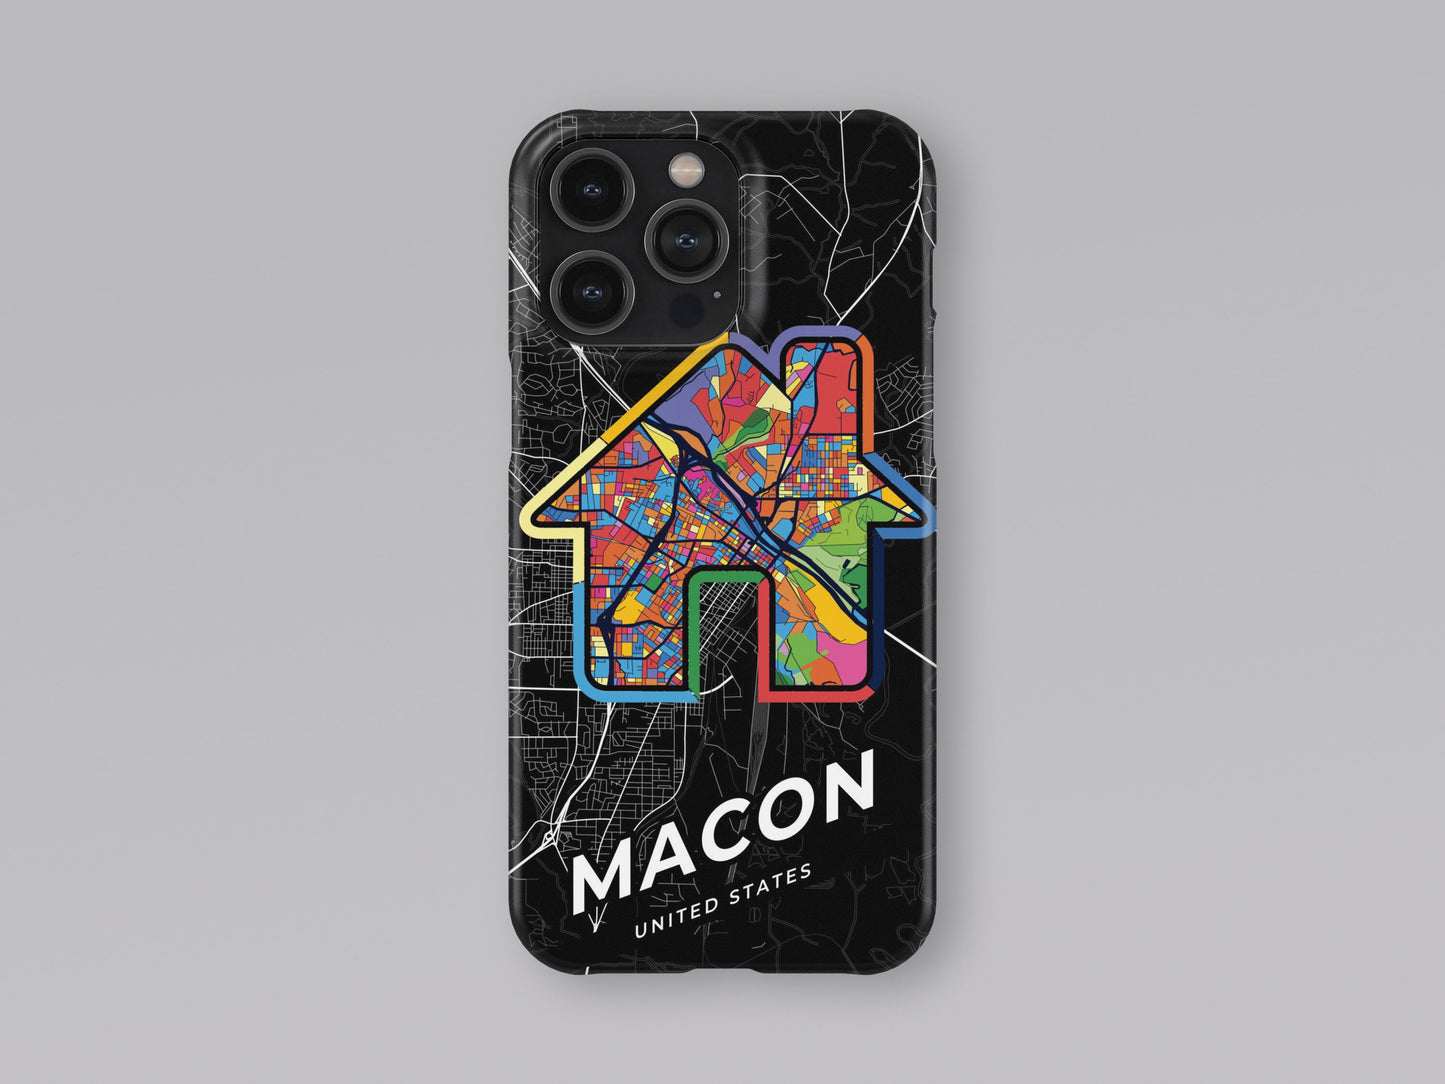 Macon Georgia slim phone case with colorful icon. Birthday, wedding or housewarming gift. Couple match cases. 3